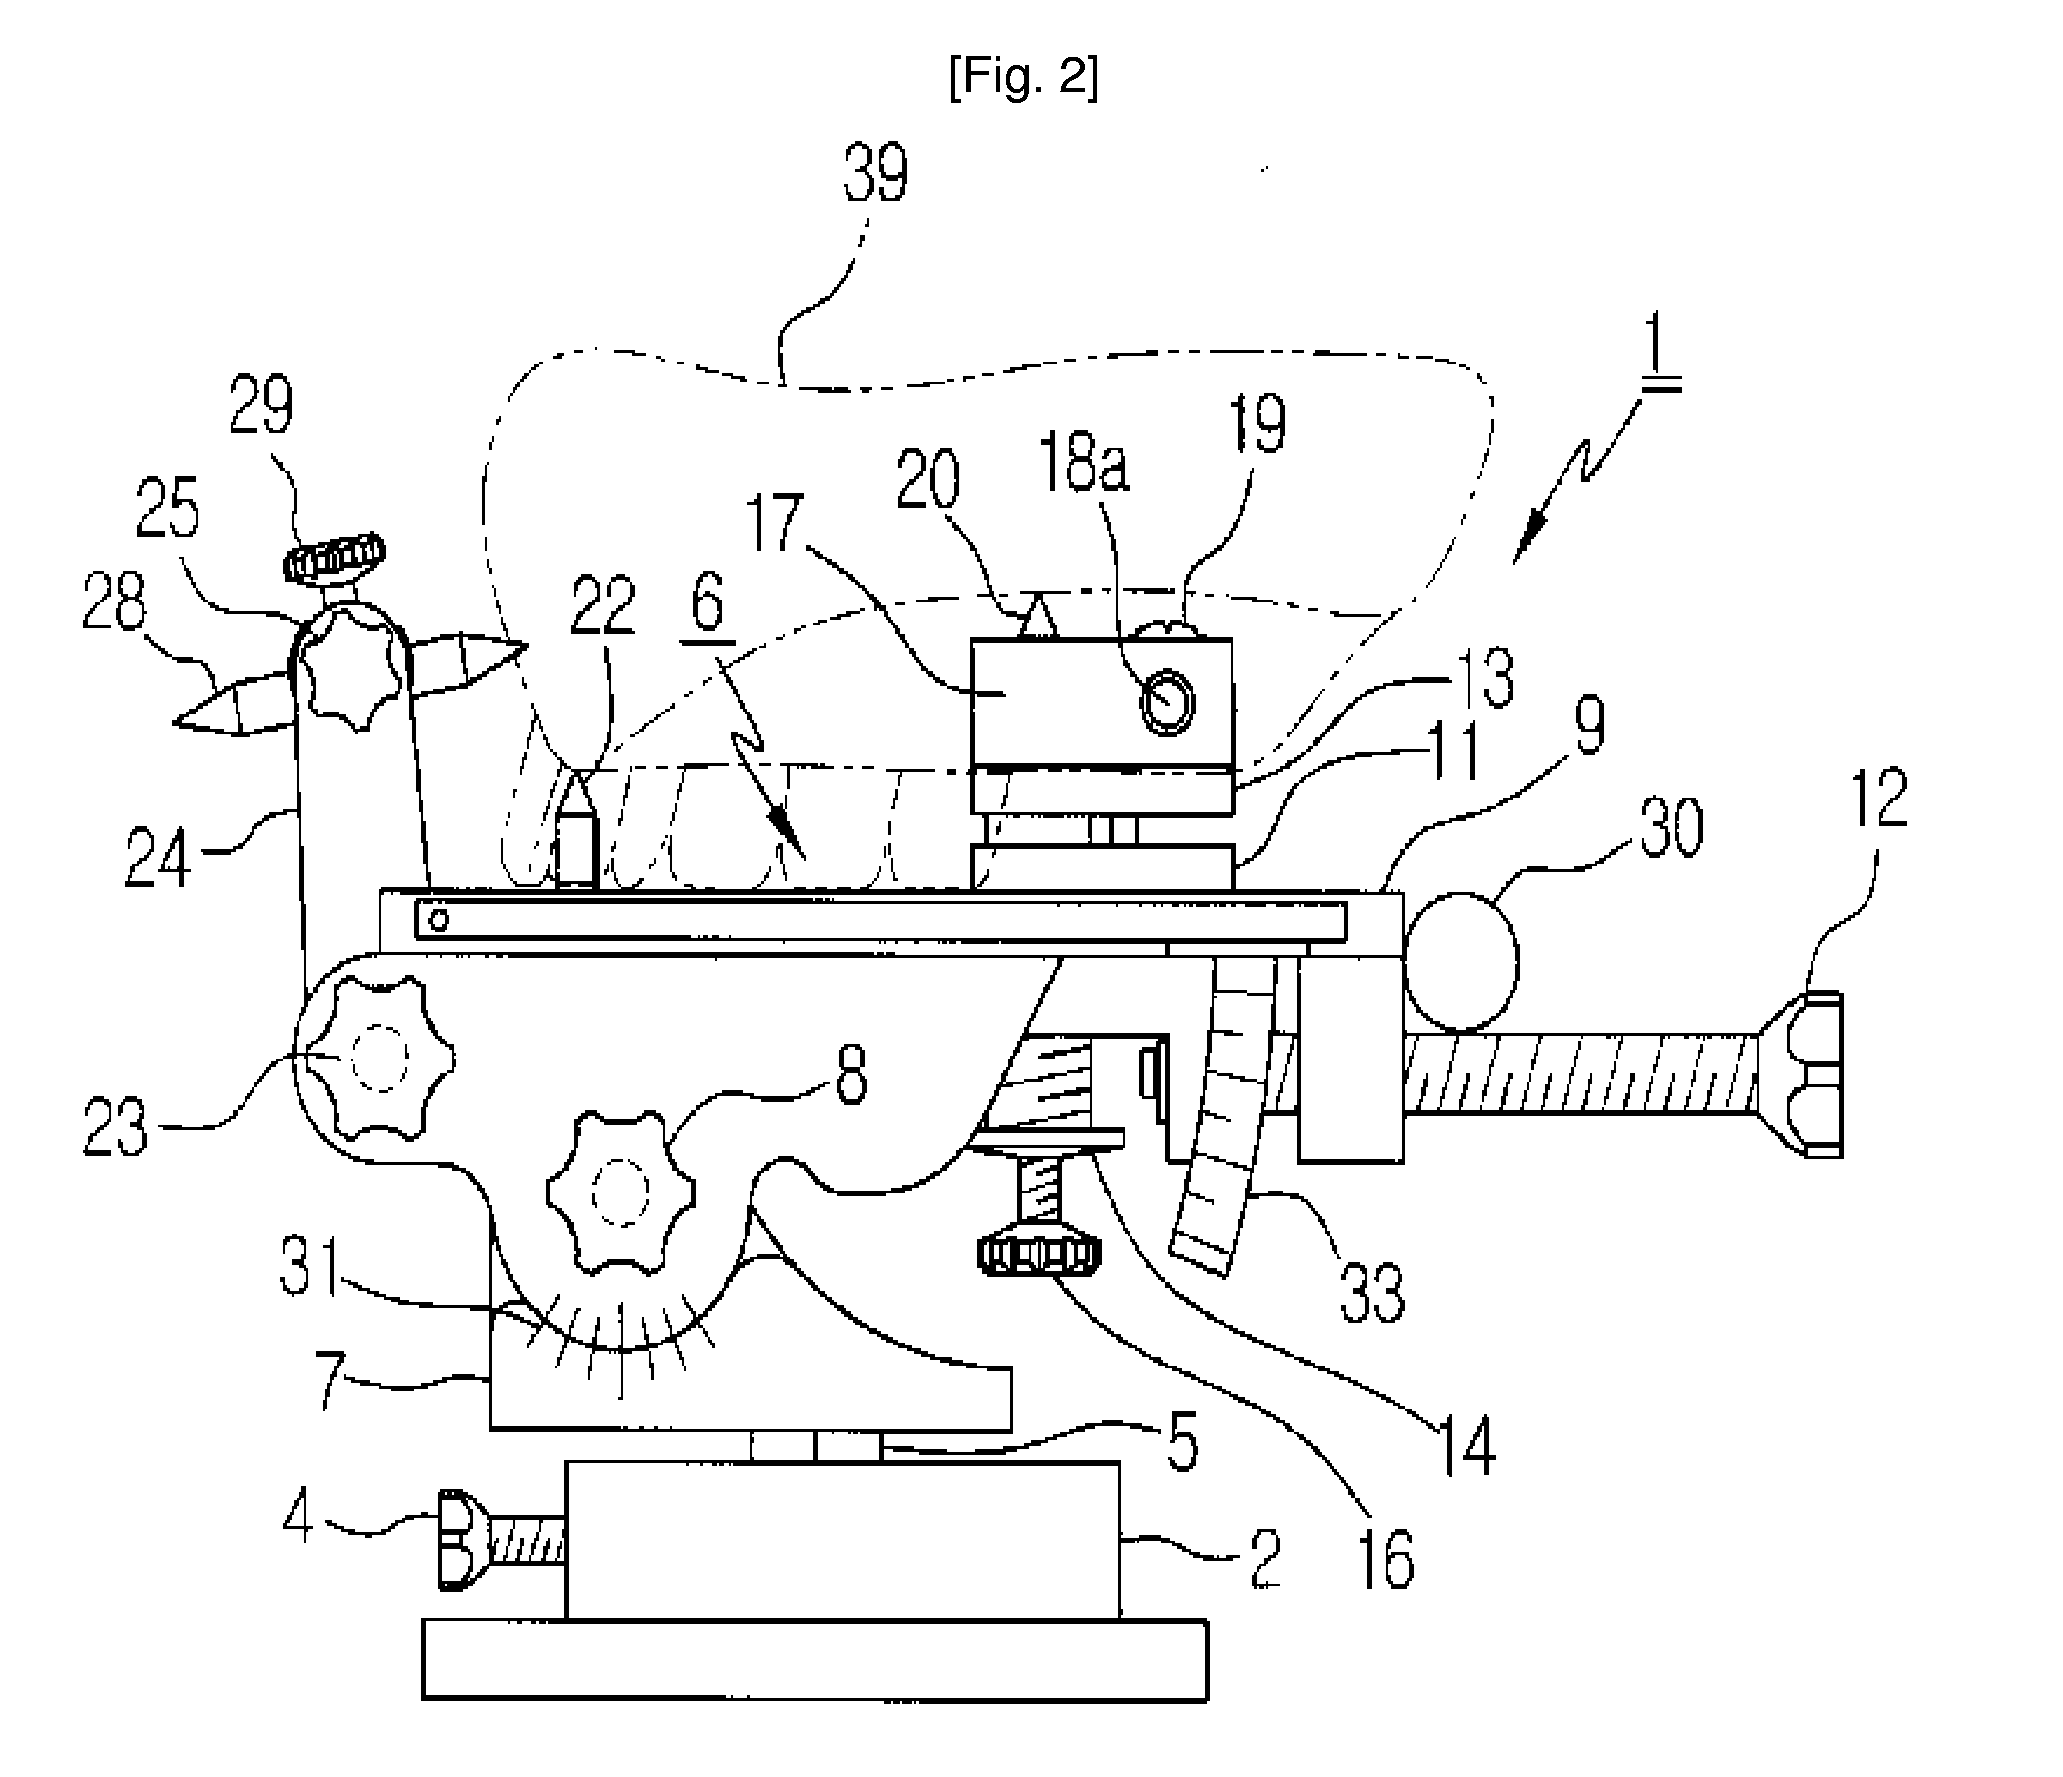 Device for attaching dental model to articulator